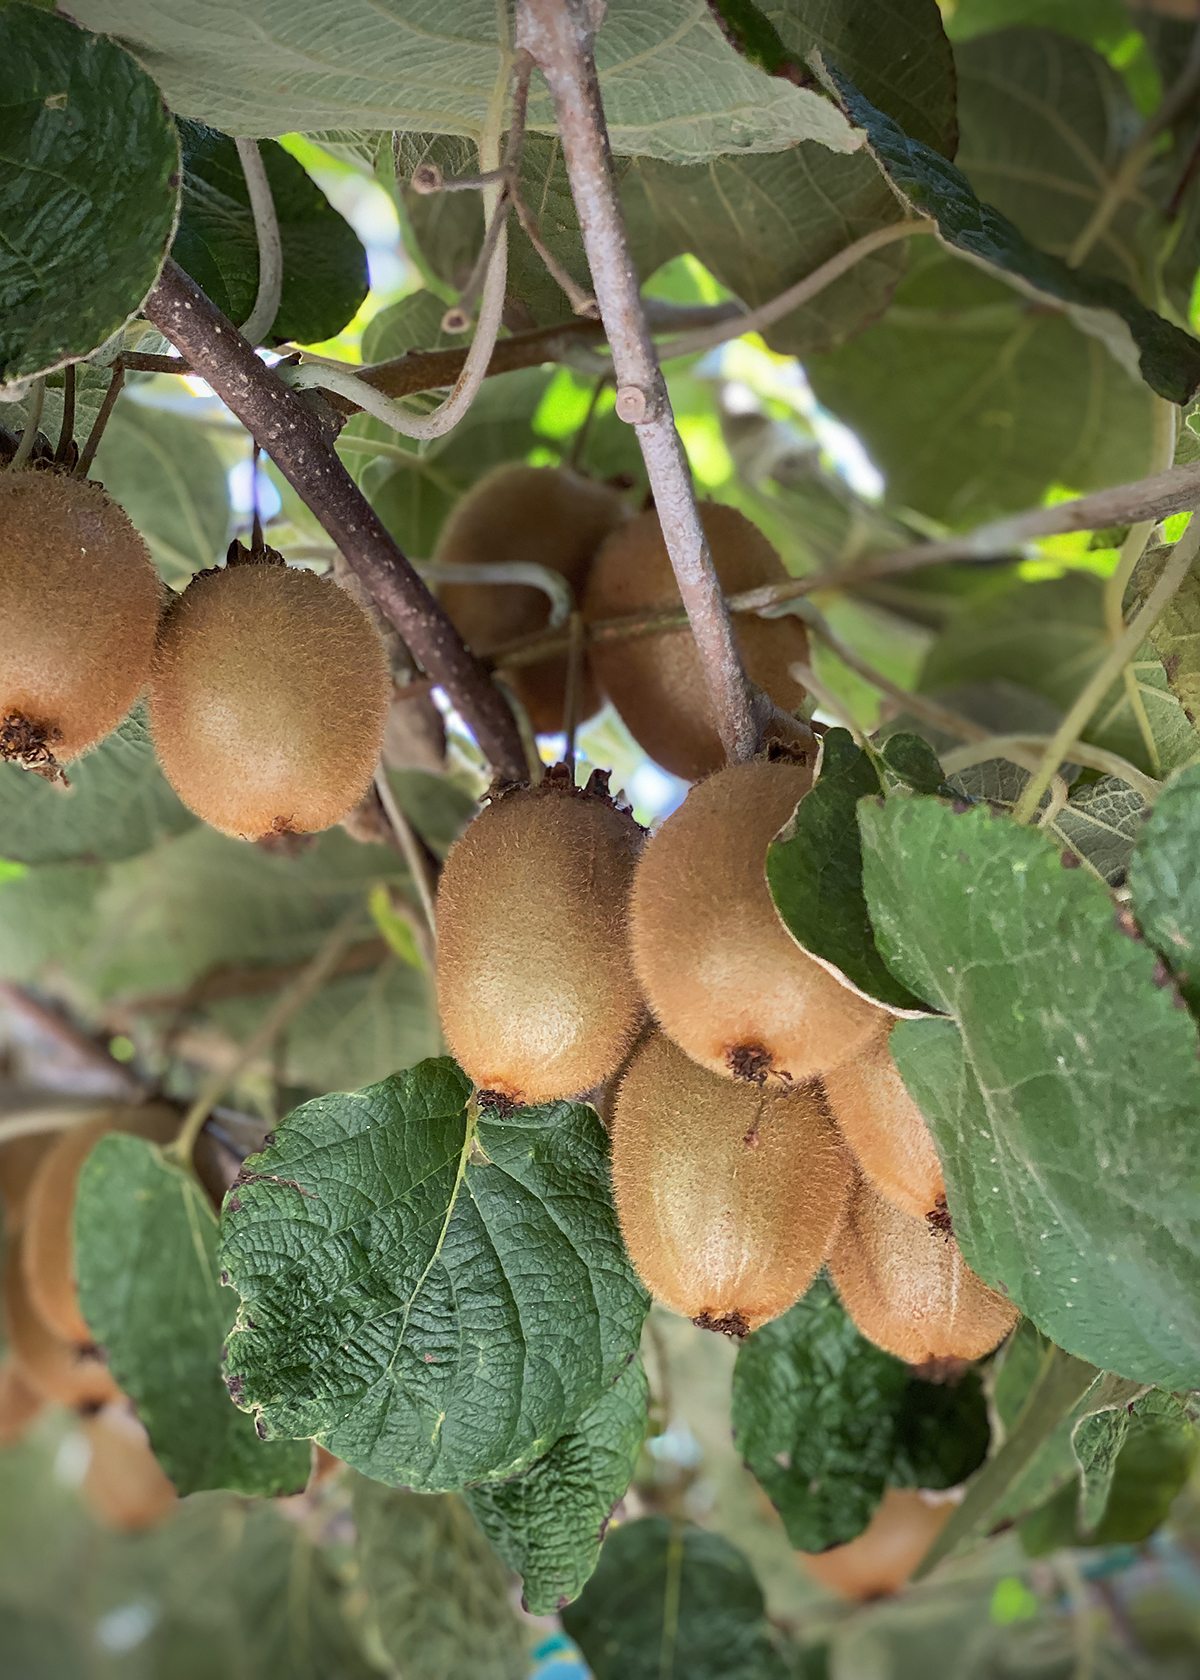 kiwifruit hanging from vines, Central Valley, CA